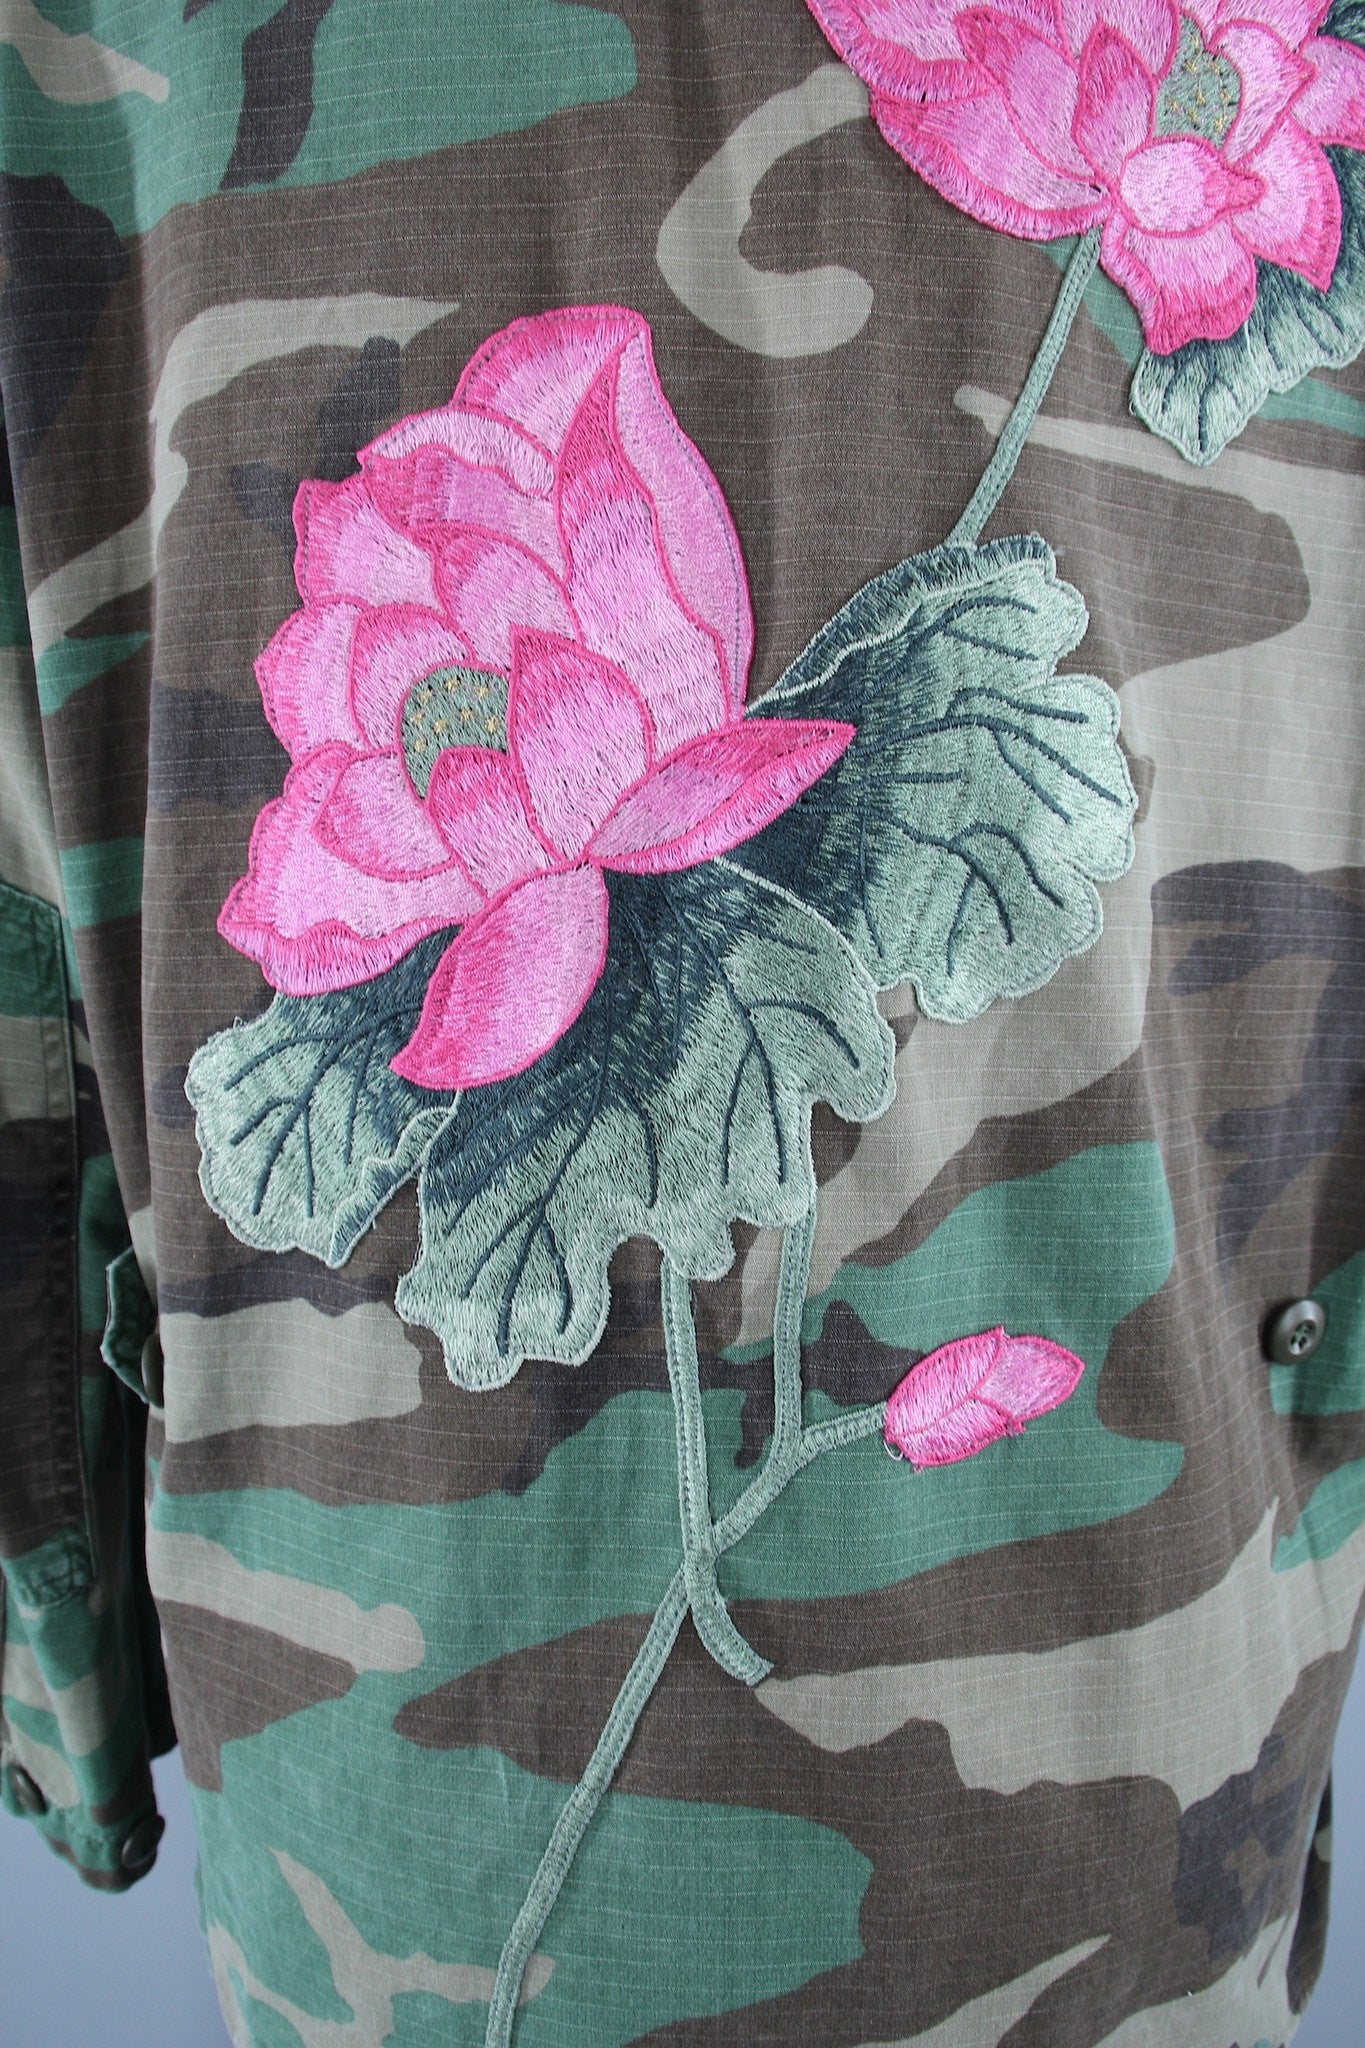 Vintage Embroidered Camouflage Jacket / US Marines Military Camo Coat / Pink LOTUS Floral Embroidery - ThisBlueBird